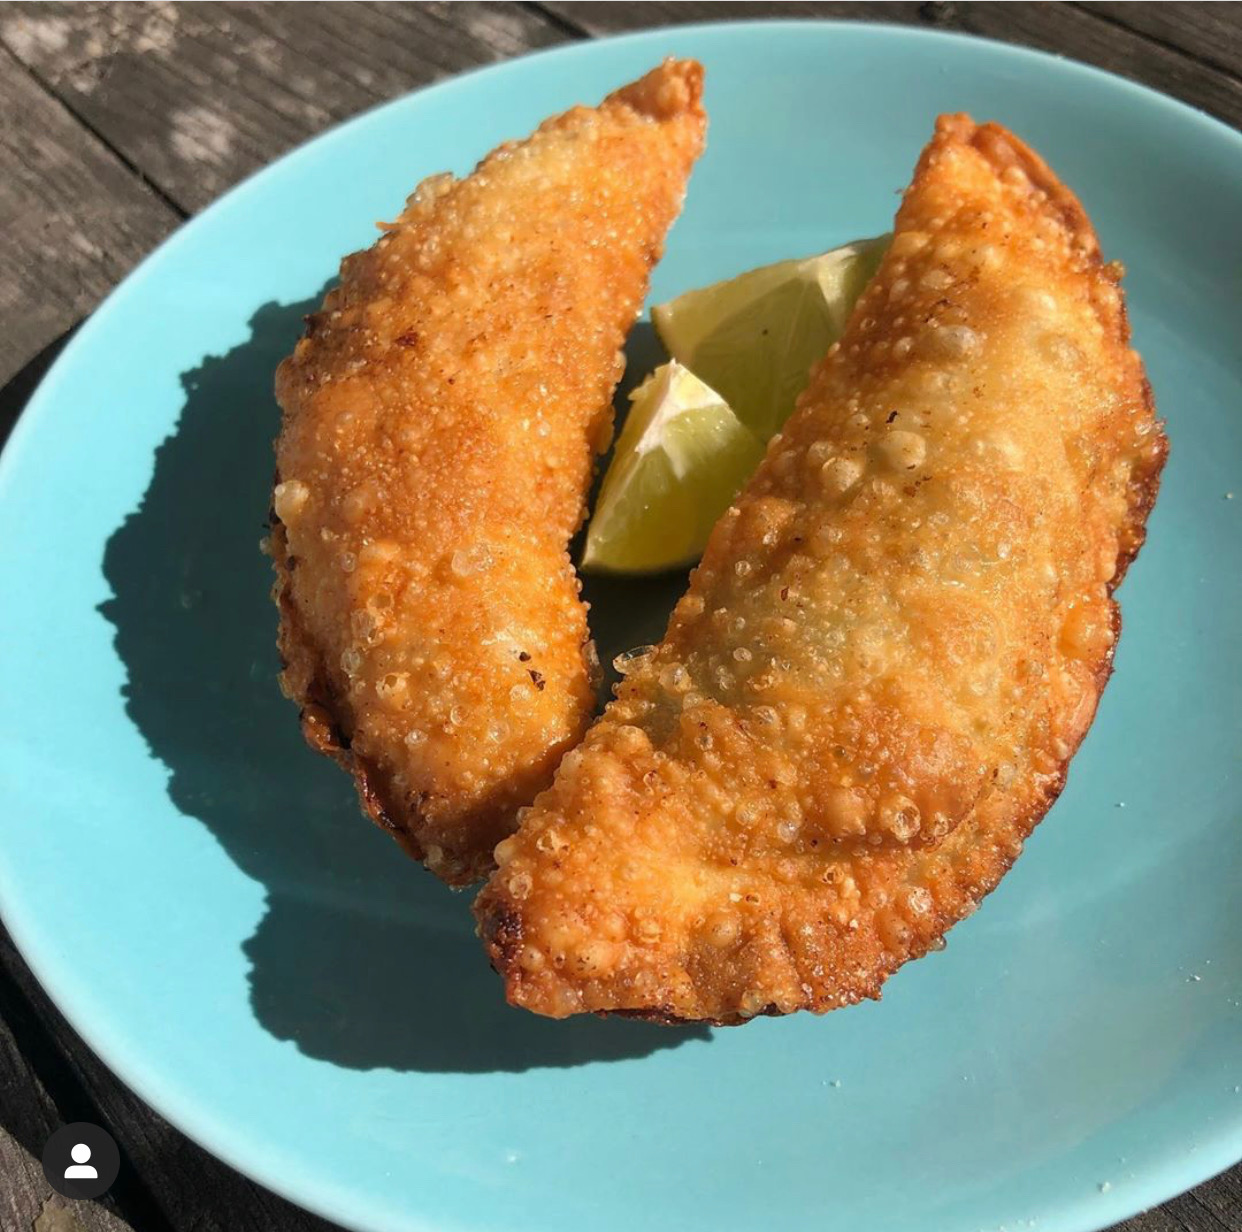 Two empanadas sit on a blue table with two lines